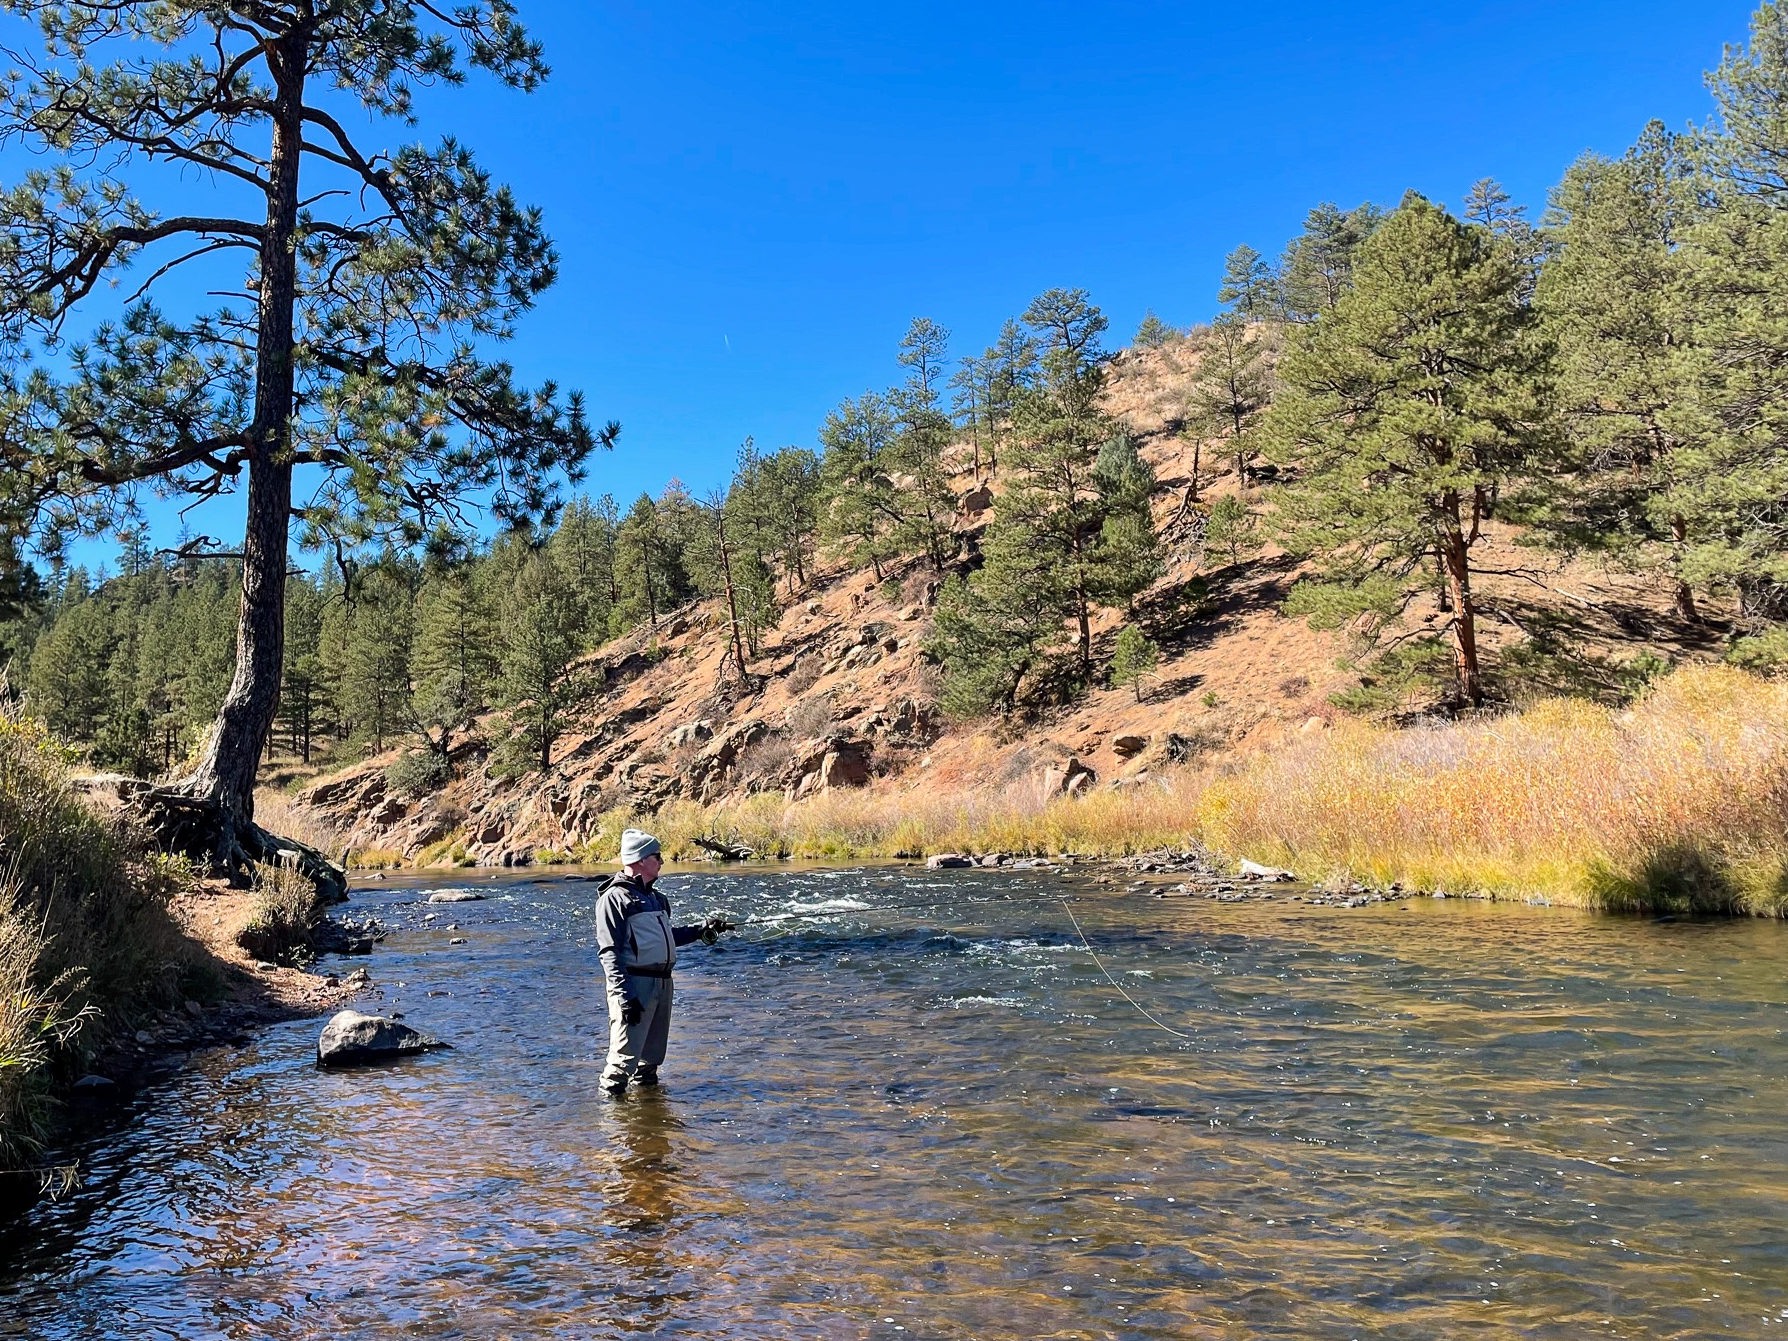 A man fly fishes in a Colorado river